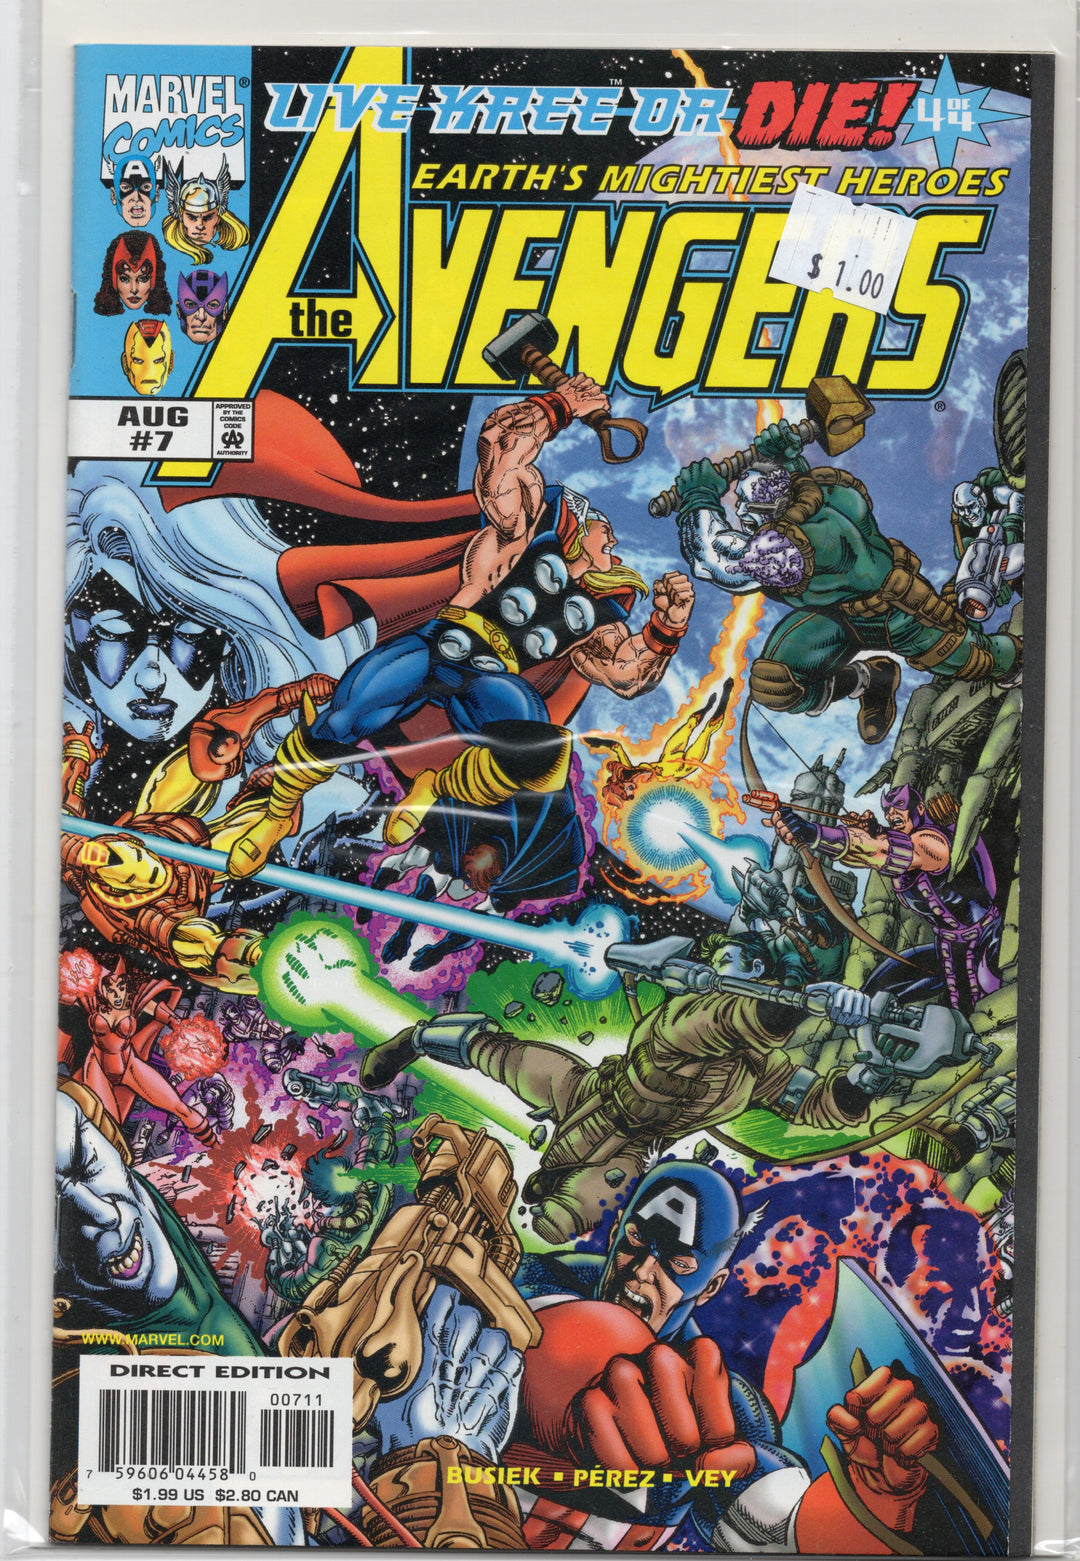 The Avengers : Earth's Mightiest Heroes #7